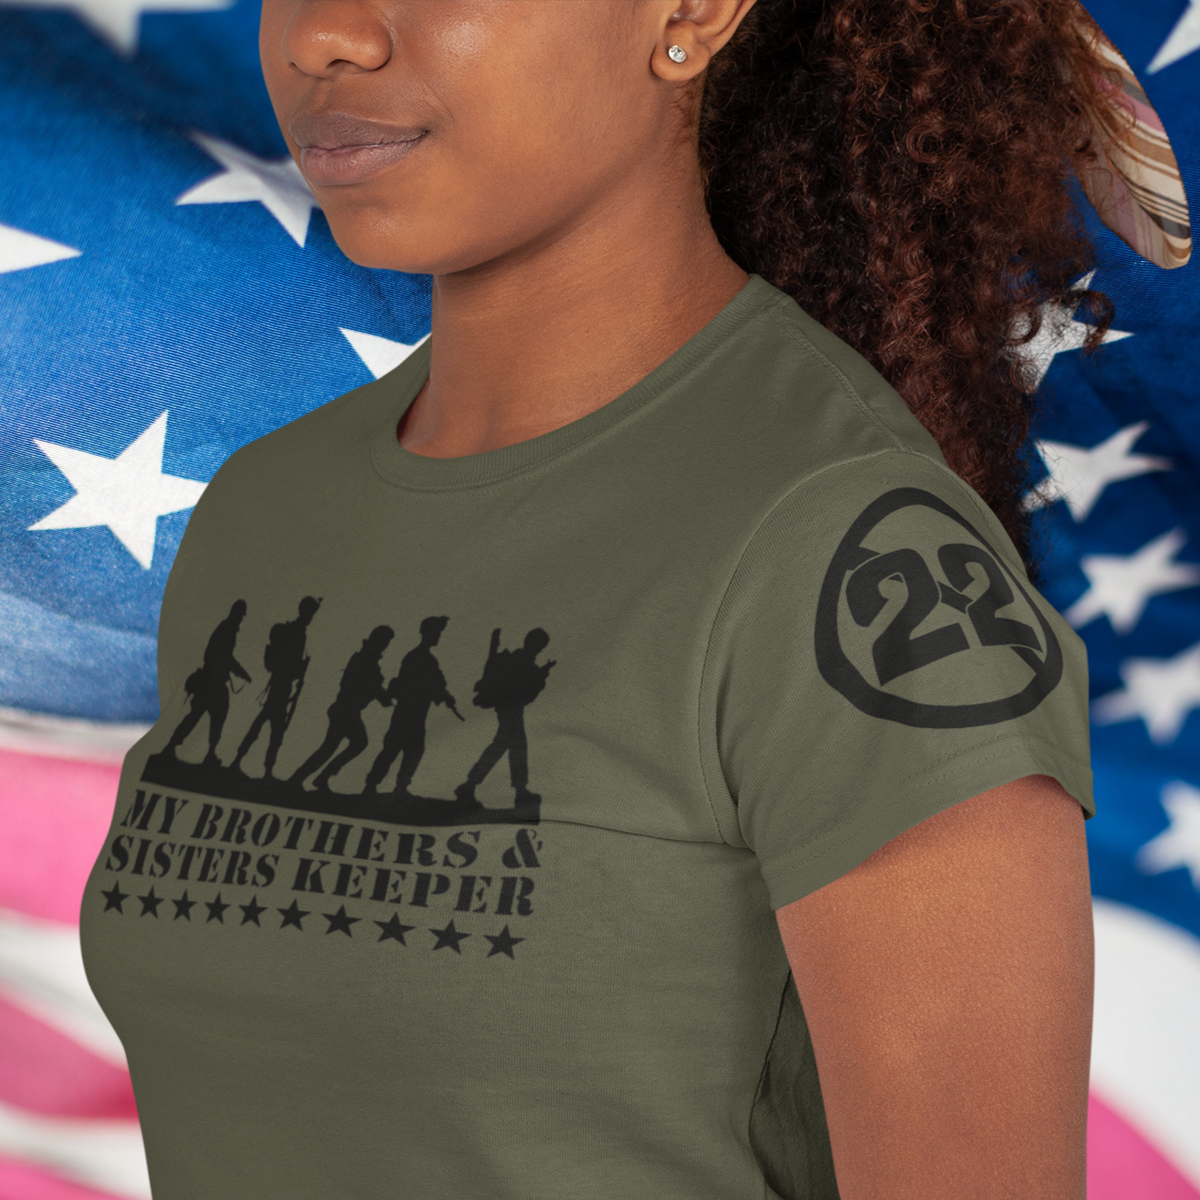 Stop 22 My Brothers & Sisters Keeper Military Veterans Unisex T Shirt S / Heather Gray